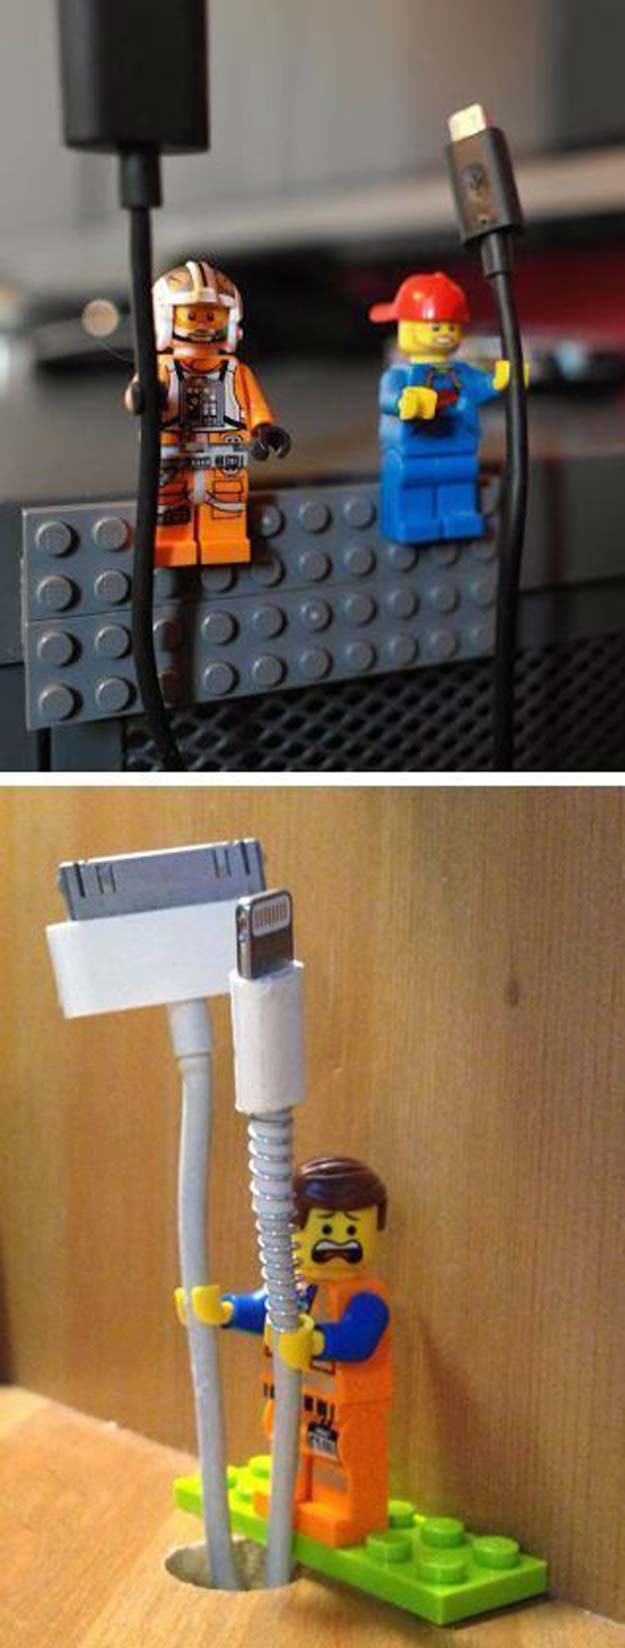 Fun DIY Ideas for Your Desk - DIY Lego Man Cord Holder - Cubicles, Ideas for Teens and Student - Cheap Dollar Tree Storage and Decor for Offices and Home - Cool DIY Projects and Crafts for Teens 